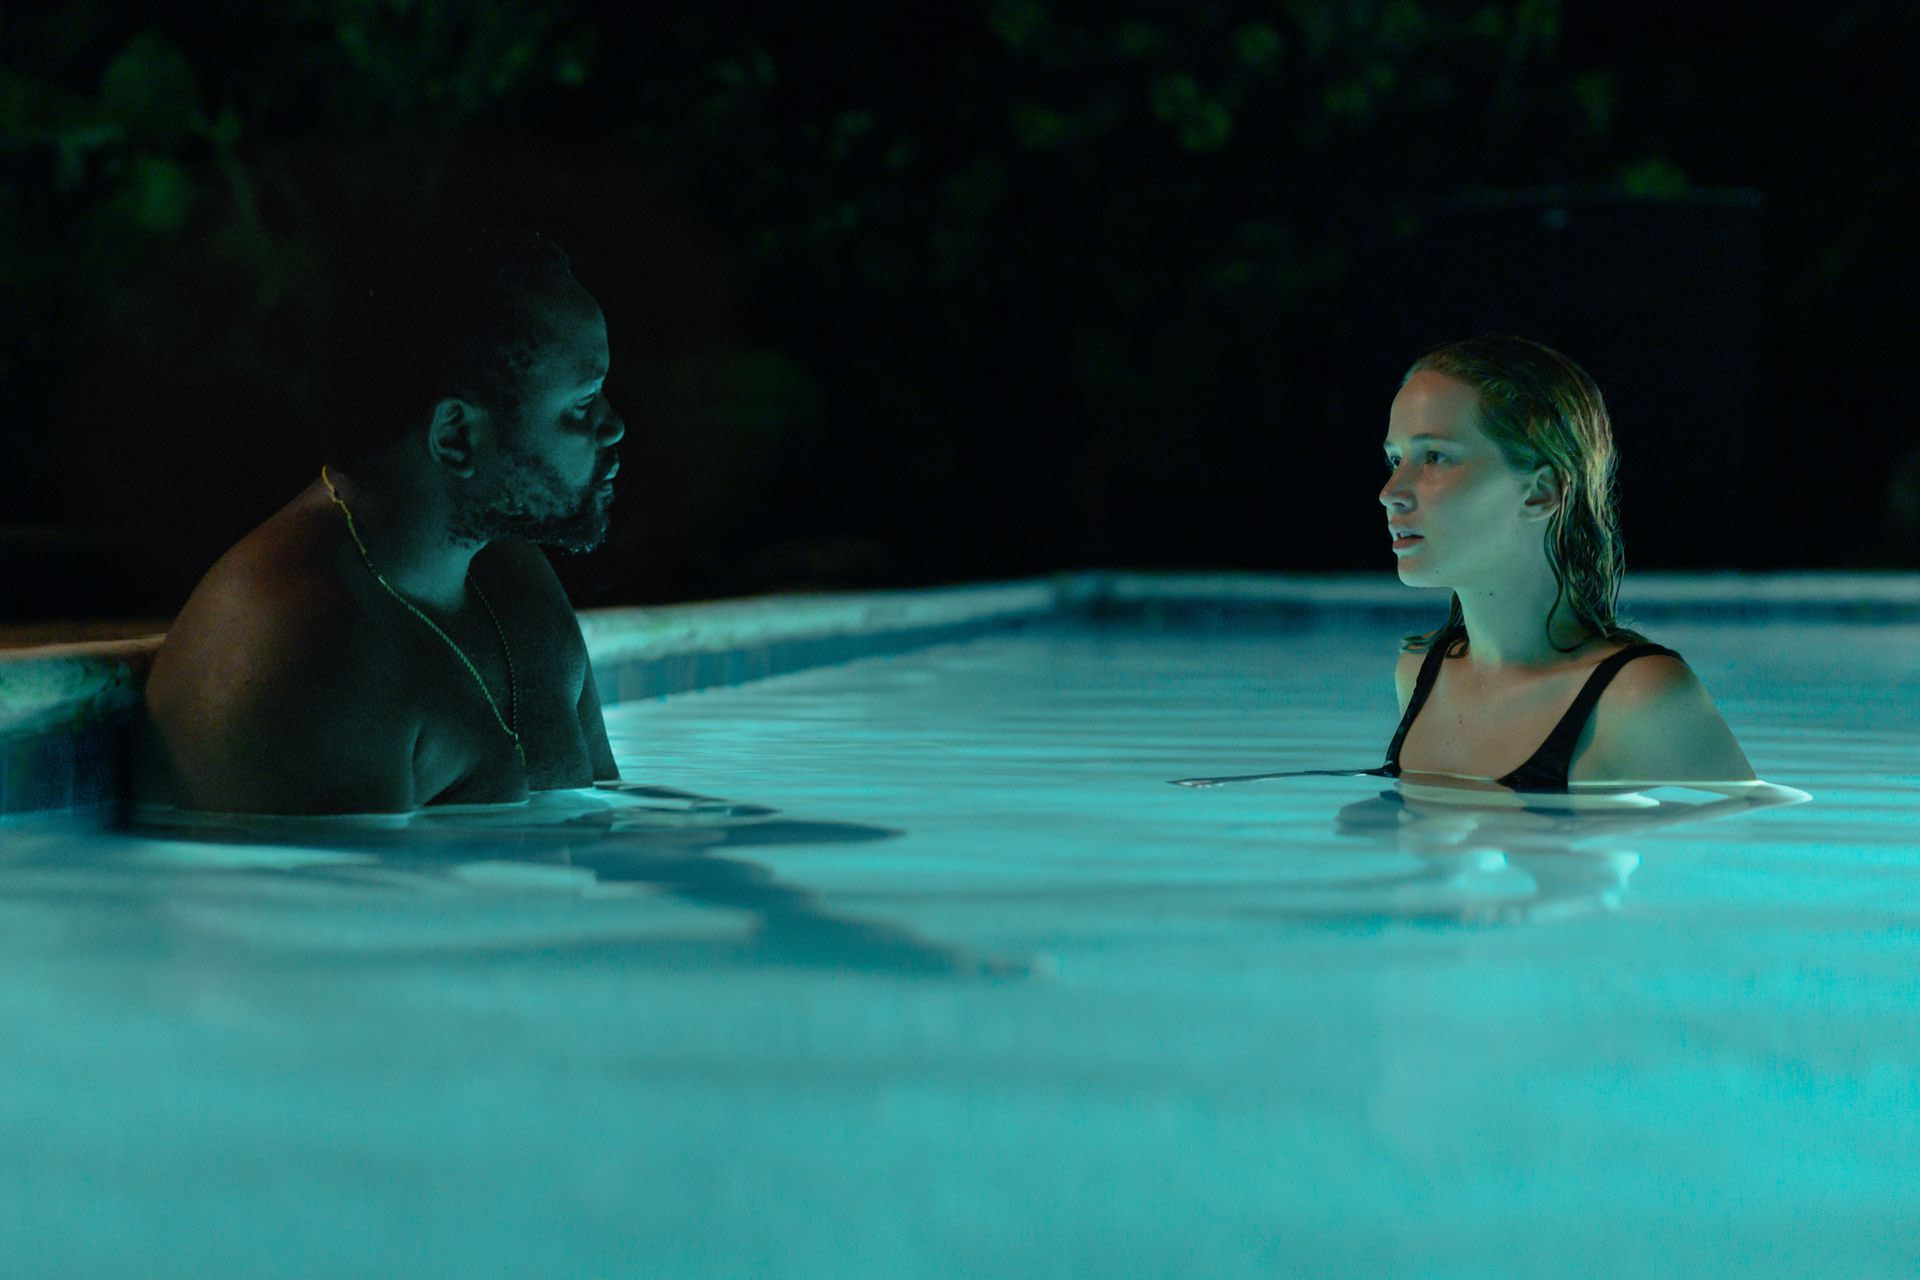 A man (Brian Tyree Henry) sitting in an illuminated pool across from a woman (Jennifer Lawrence) swimming at night-time.